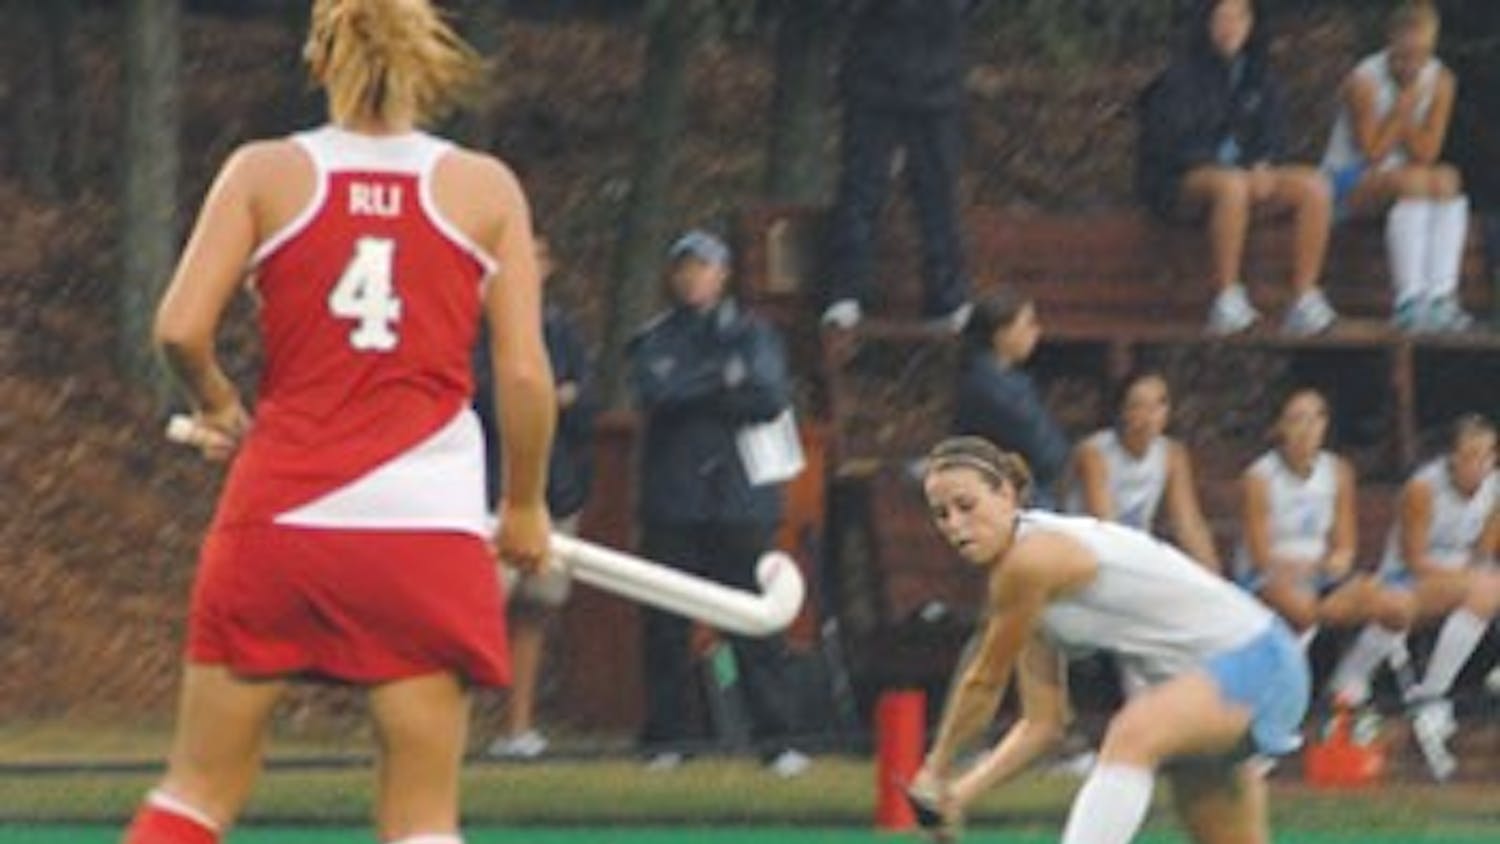 Dani Forword doubled her season scoring with two goals against Radford. 